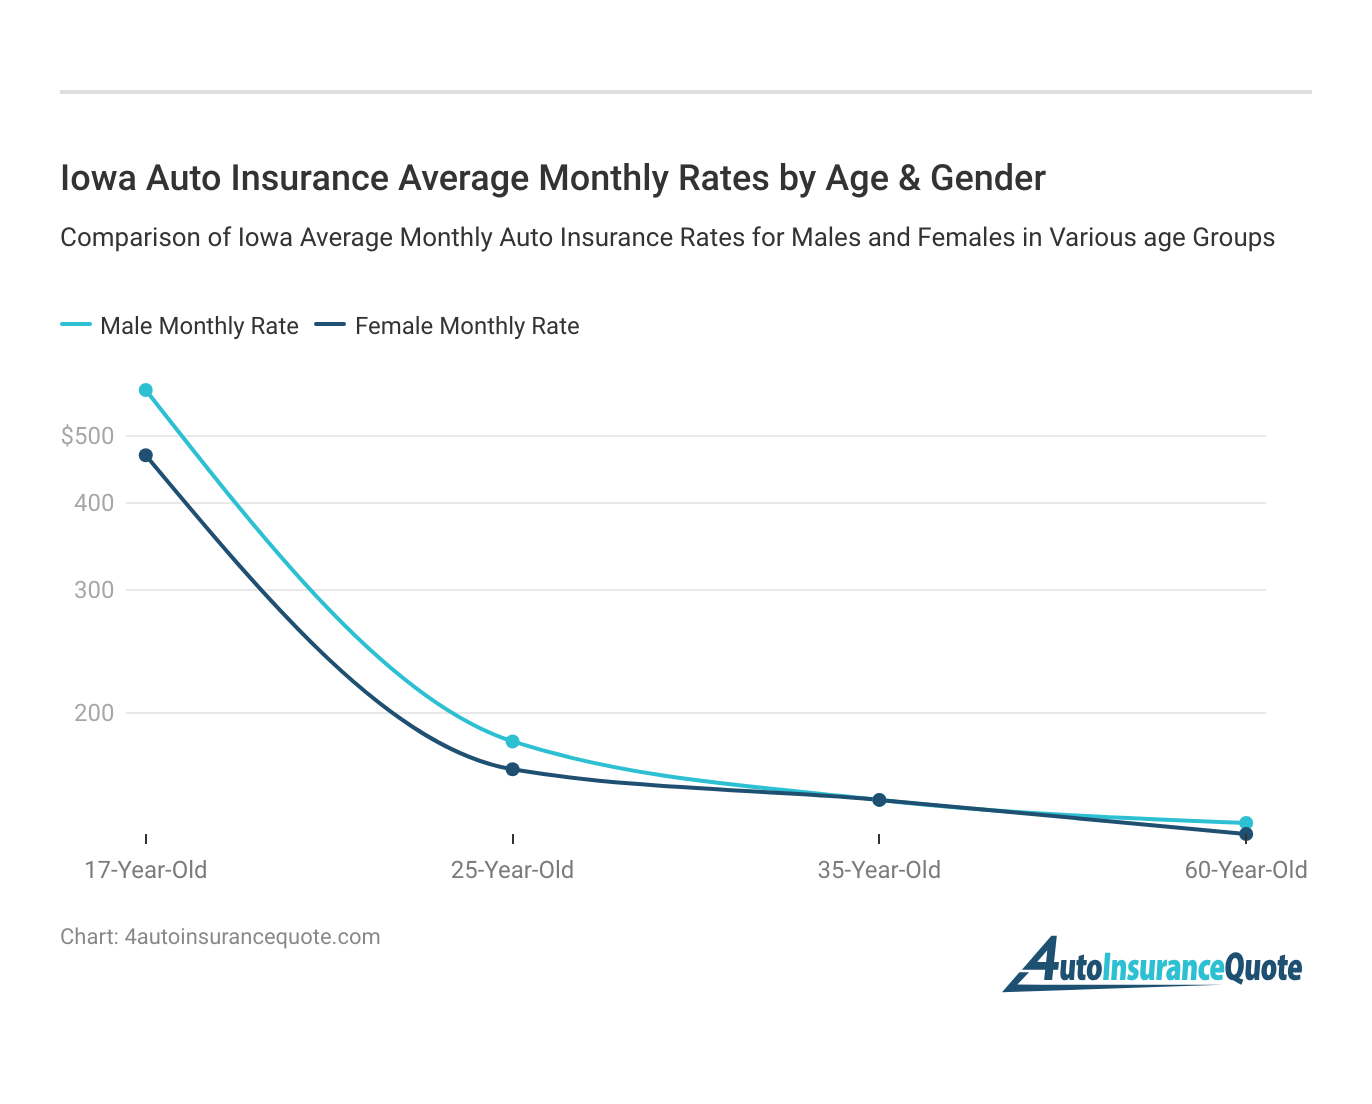 <h3>Iowa Auto Insurance Average Monthly Rates by Age & Gender</h3>